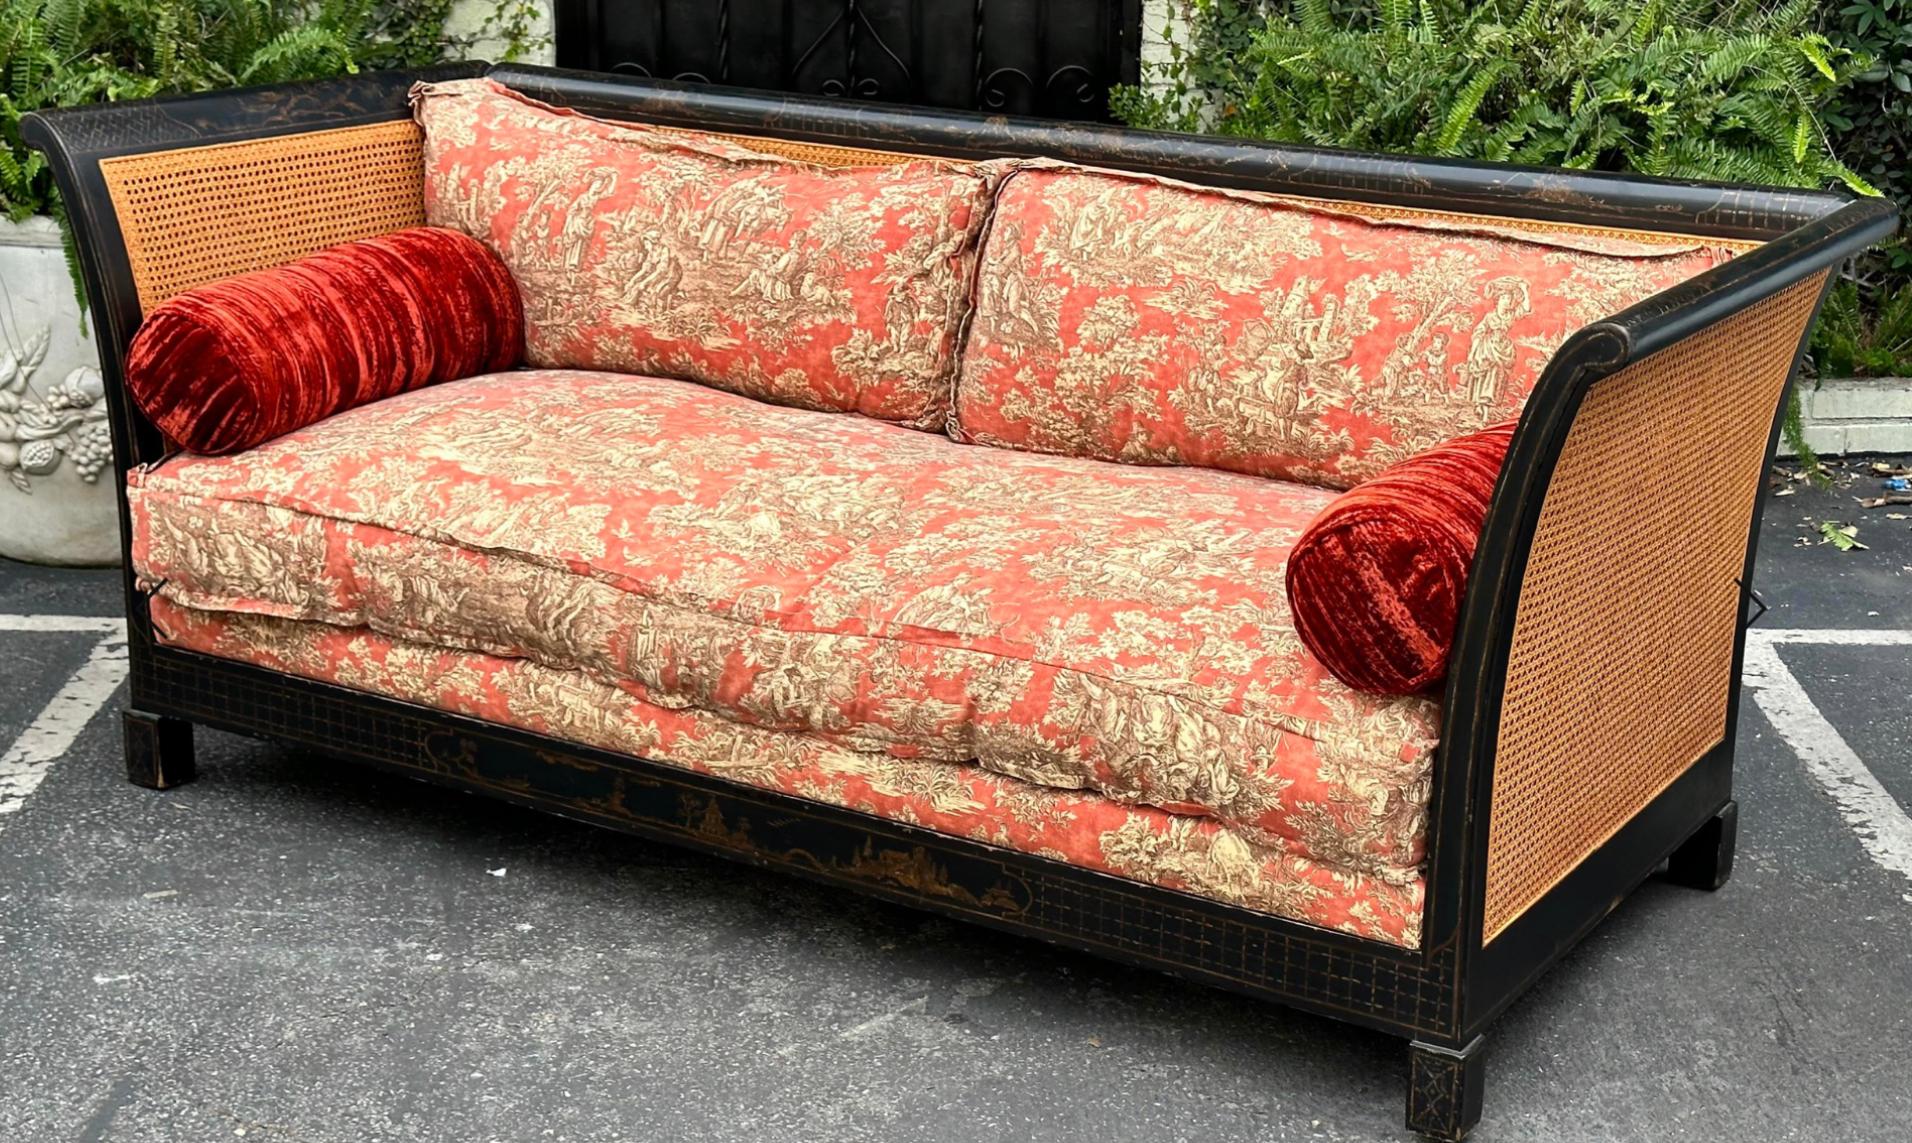 Directoire style chinoiserie black & gold red toile down filled double cane sofa settee.
Dimensions 86